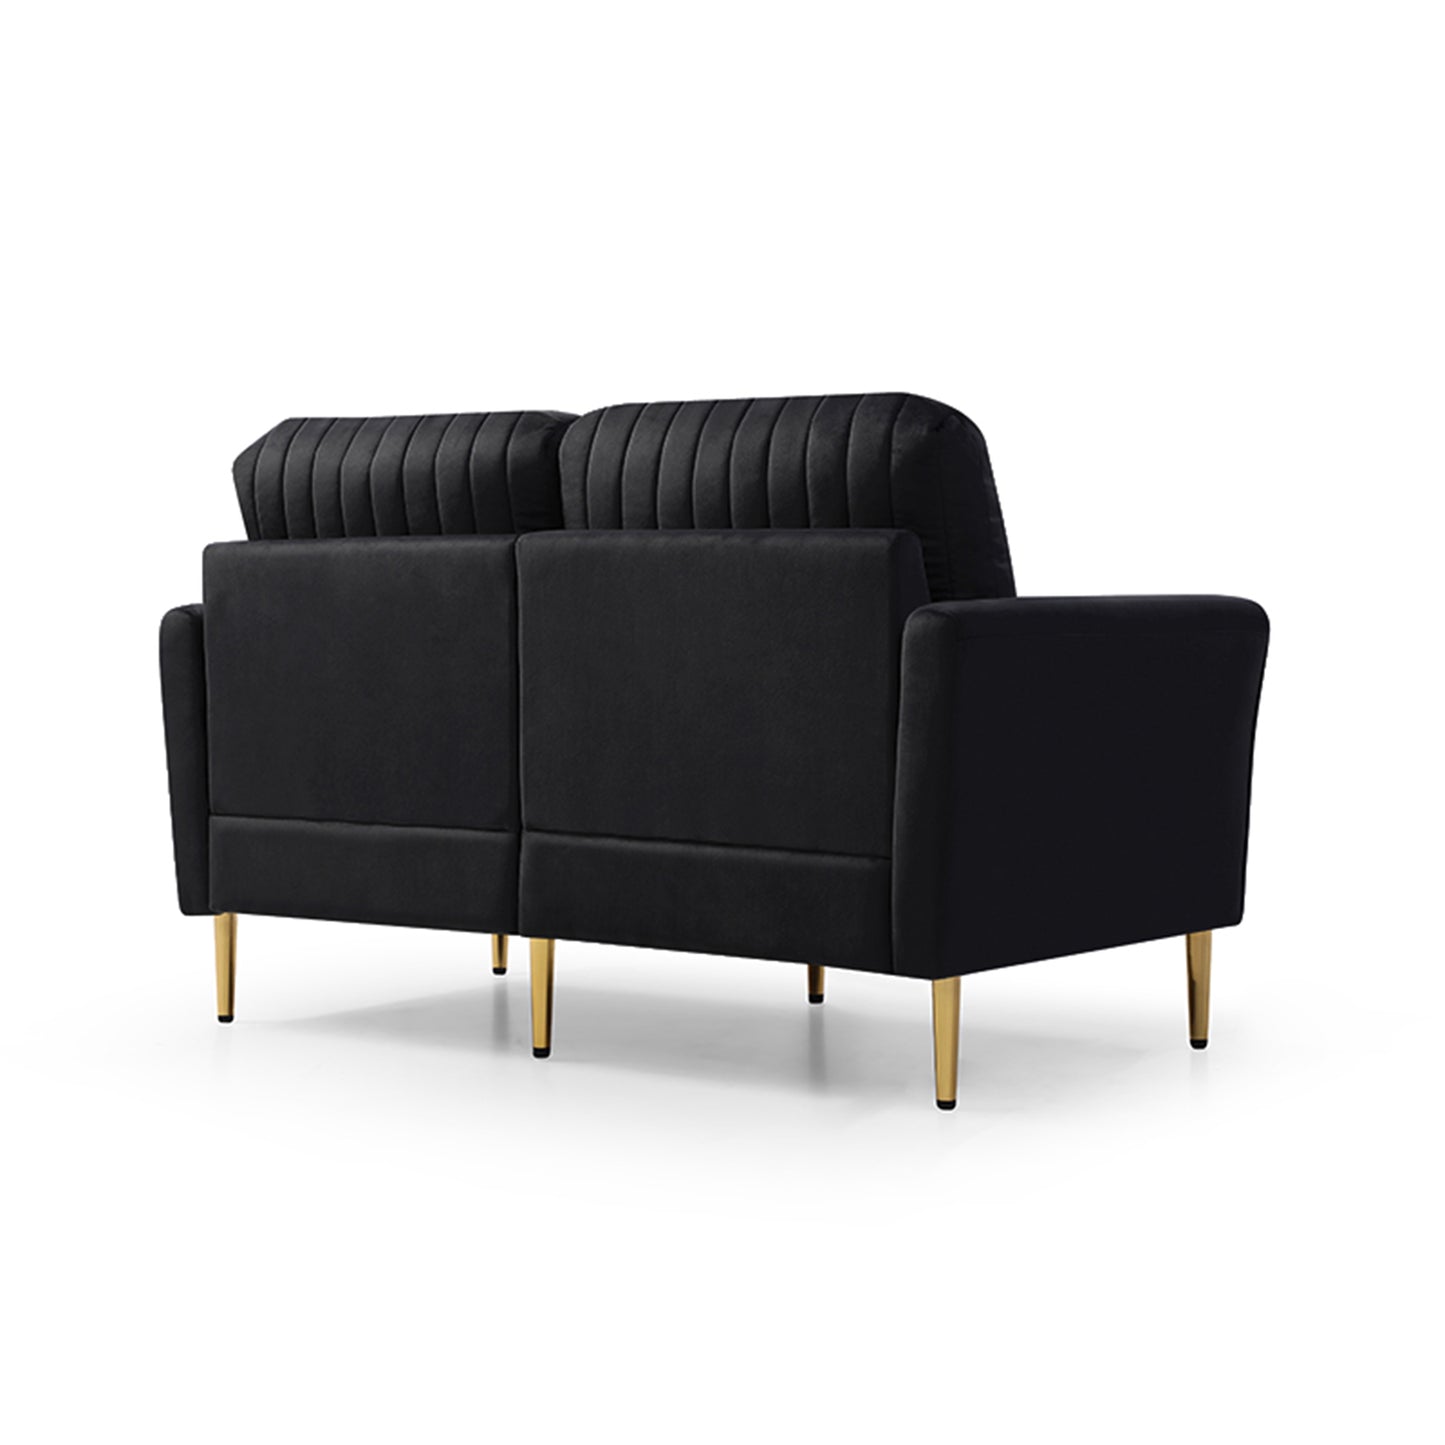 Modern Velvet 2-Seater Sofa, Upholstered Sofa with Metal Legs, 2-Seater Sofa Furniture for Small Spaces, Living Room, Bedroom, Office (Black)